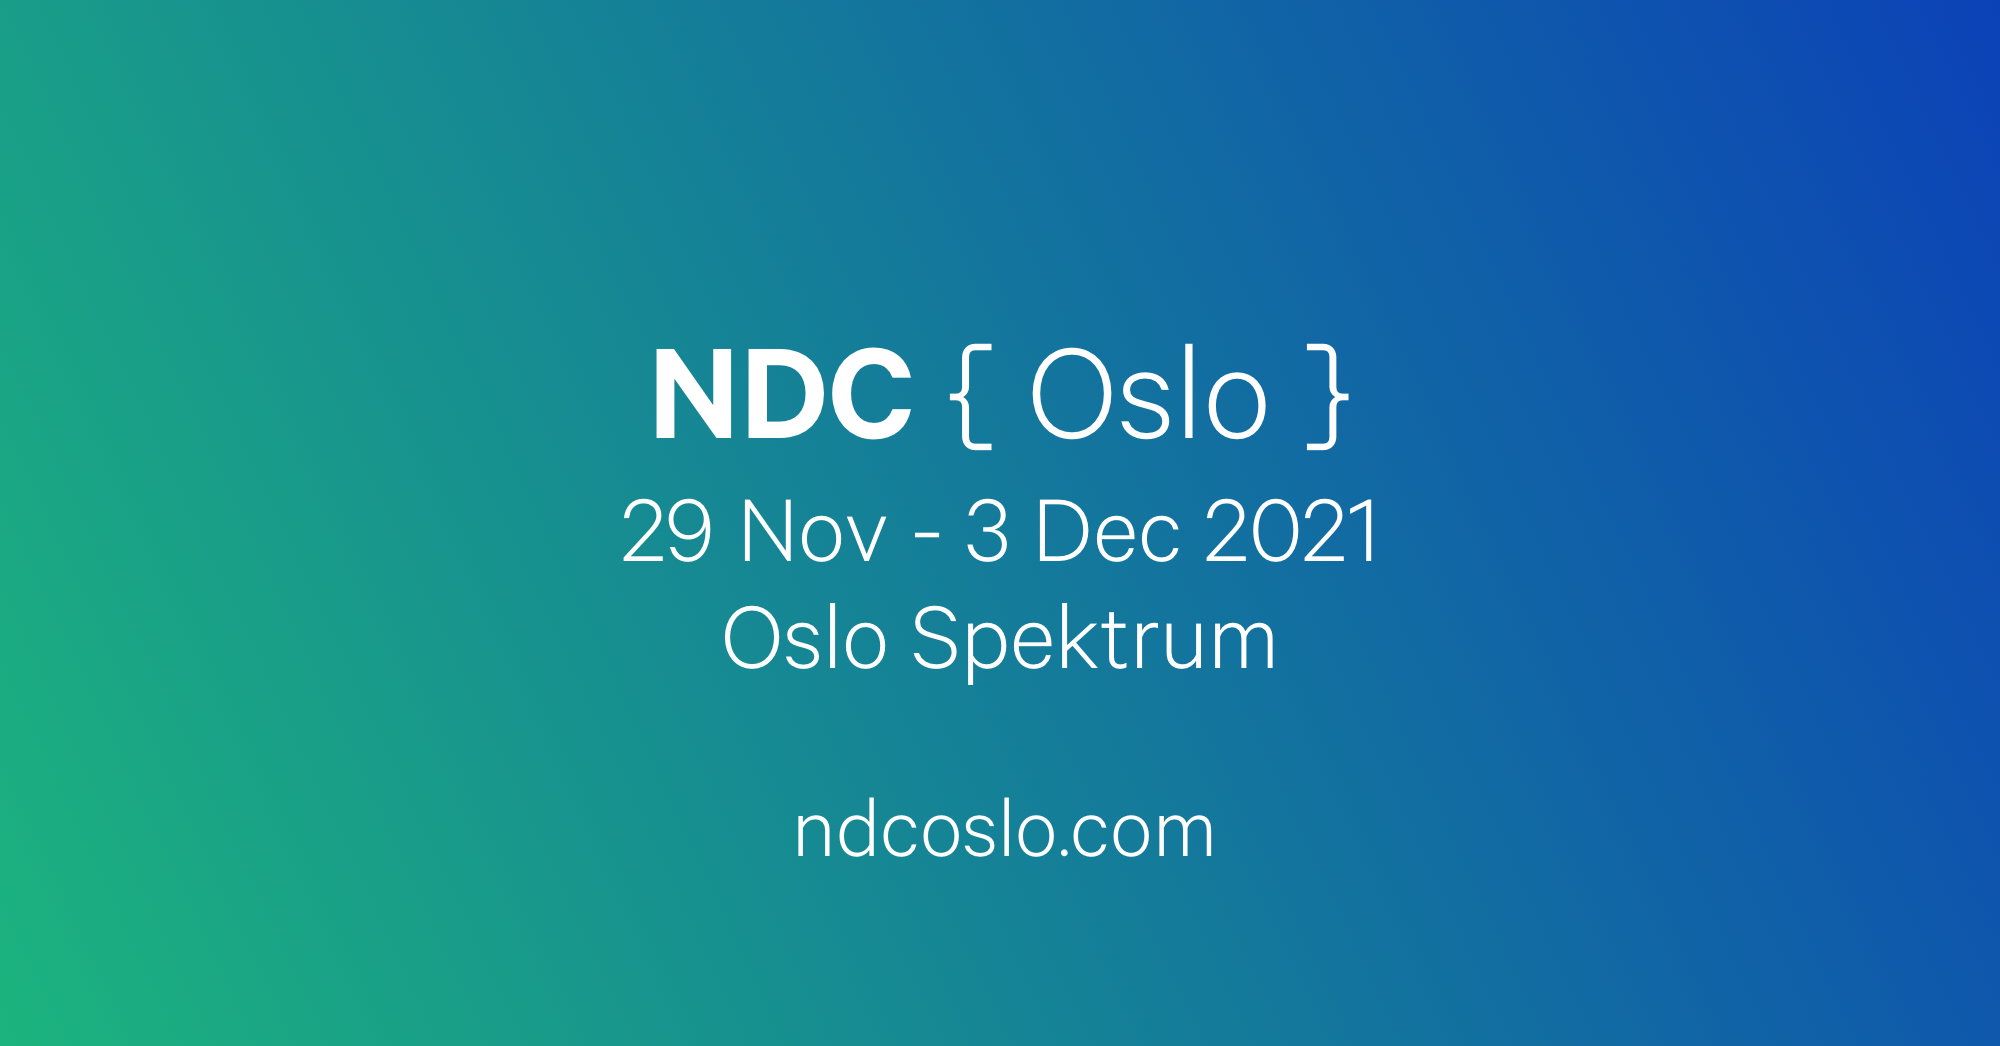 NDC Oslo 2021 Software Developers Conference